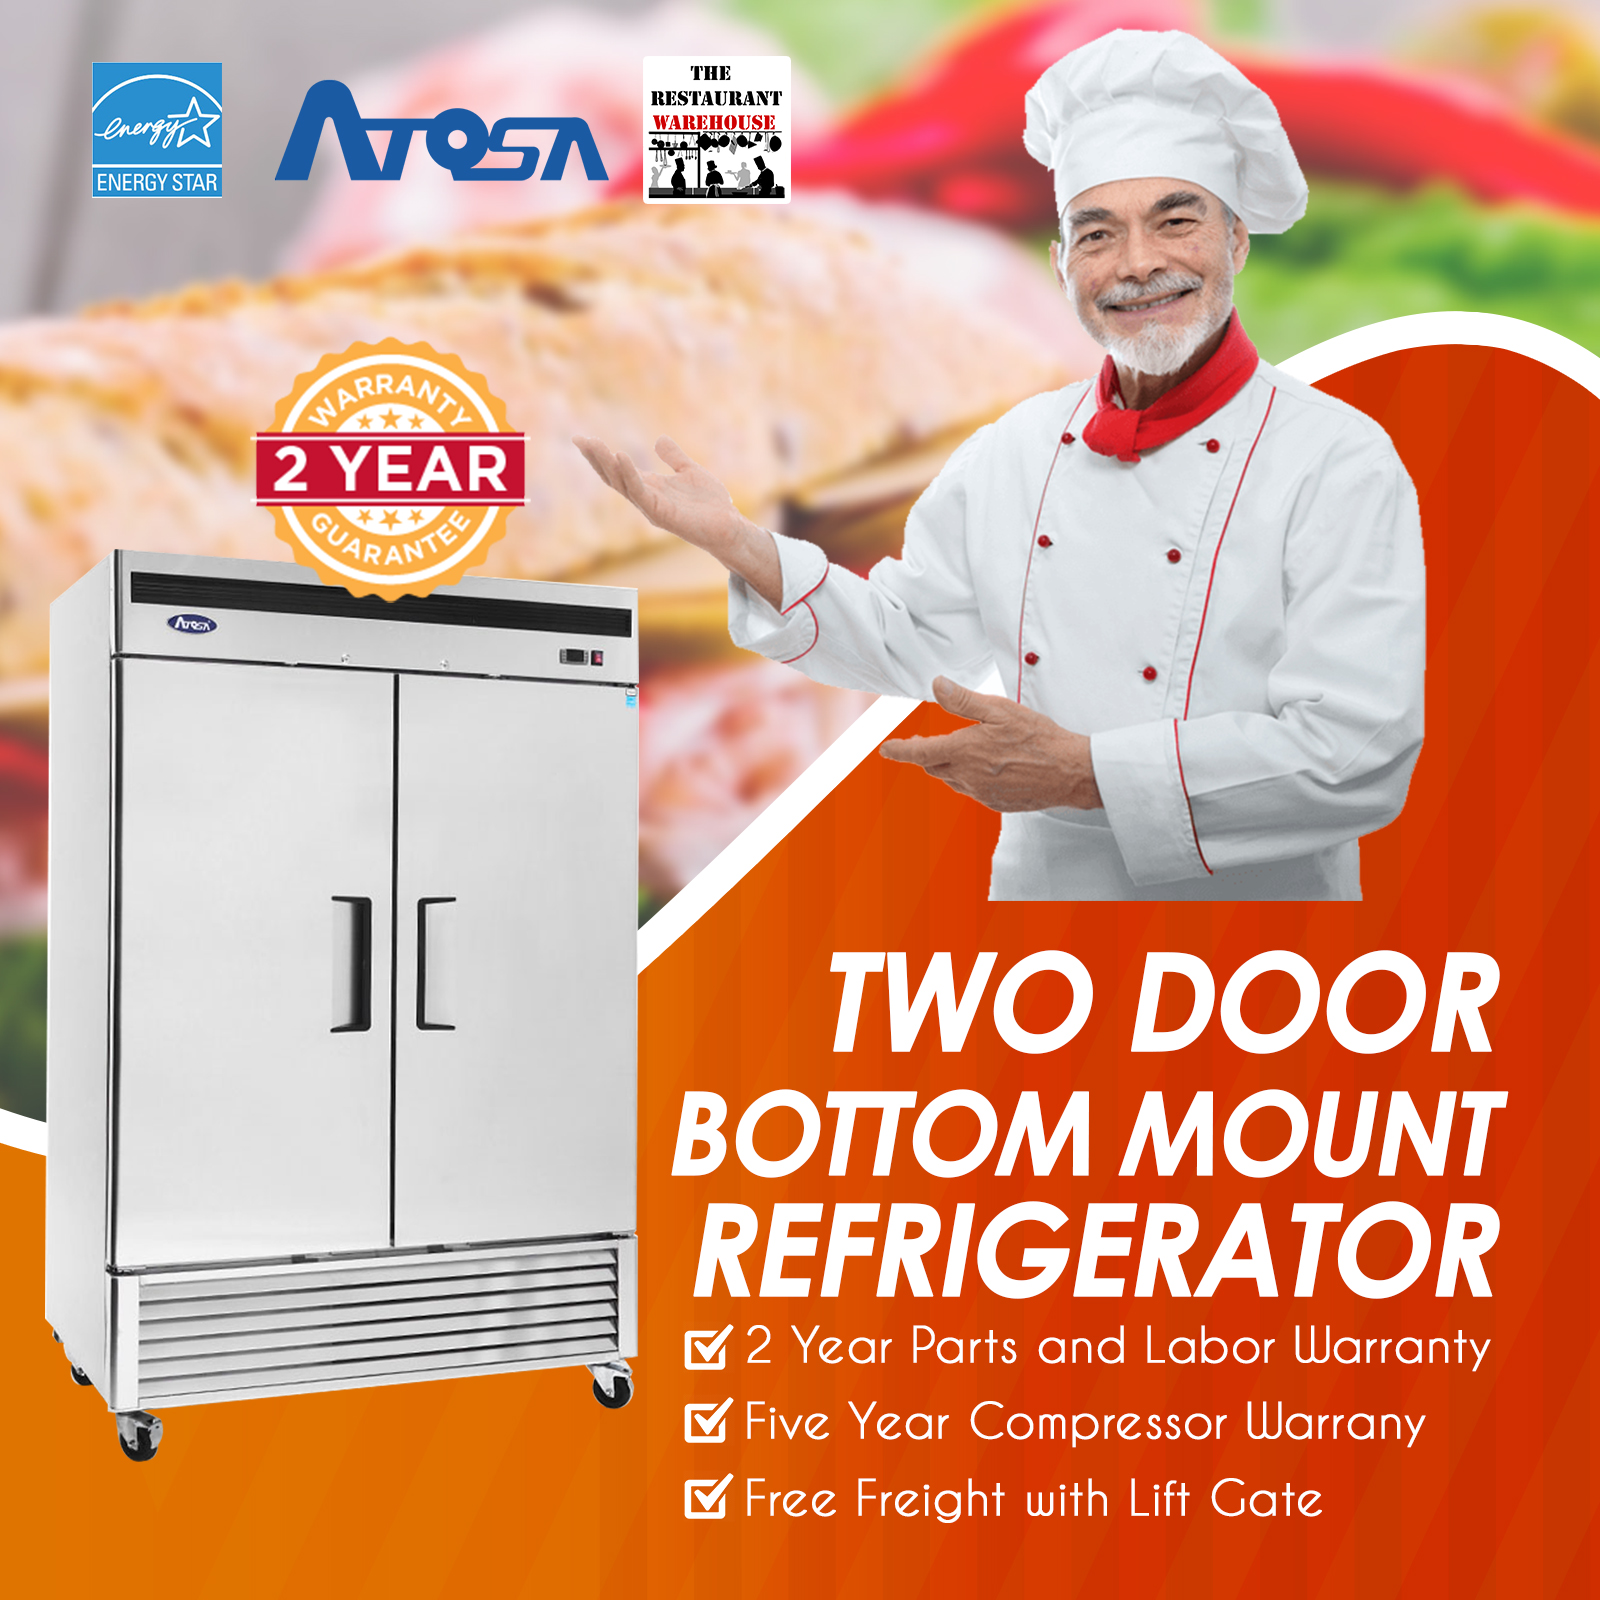 Atosa MBF8507GR 54-Inch Two Door Upright Refrigerator